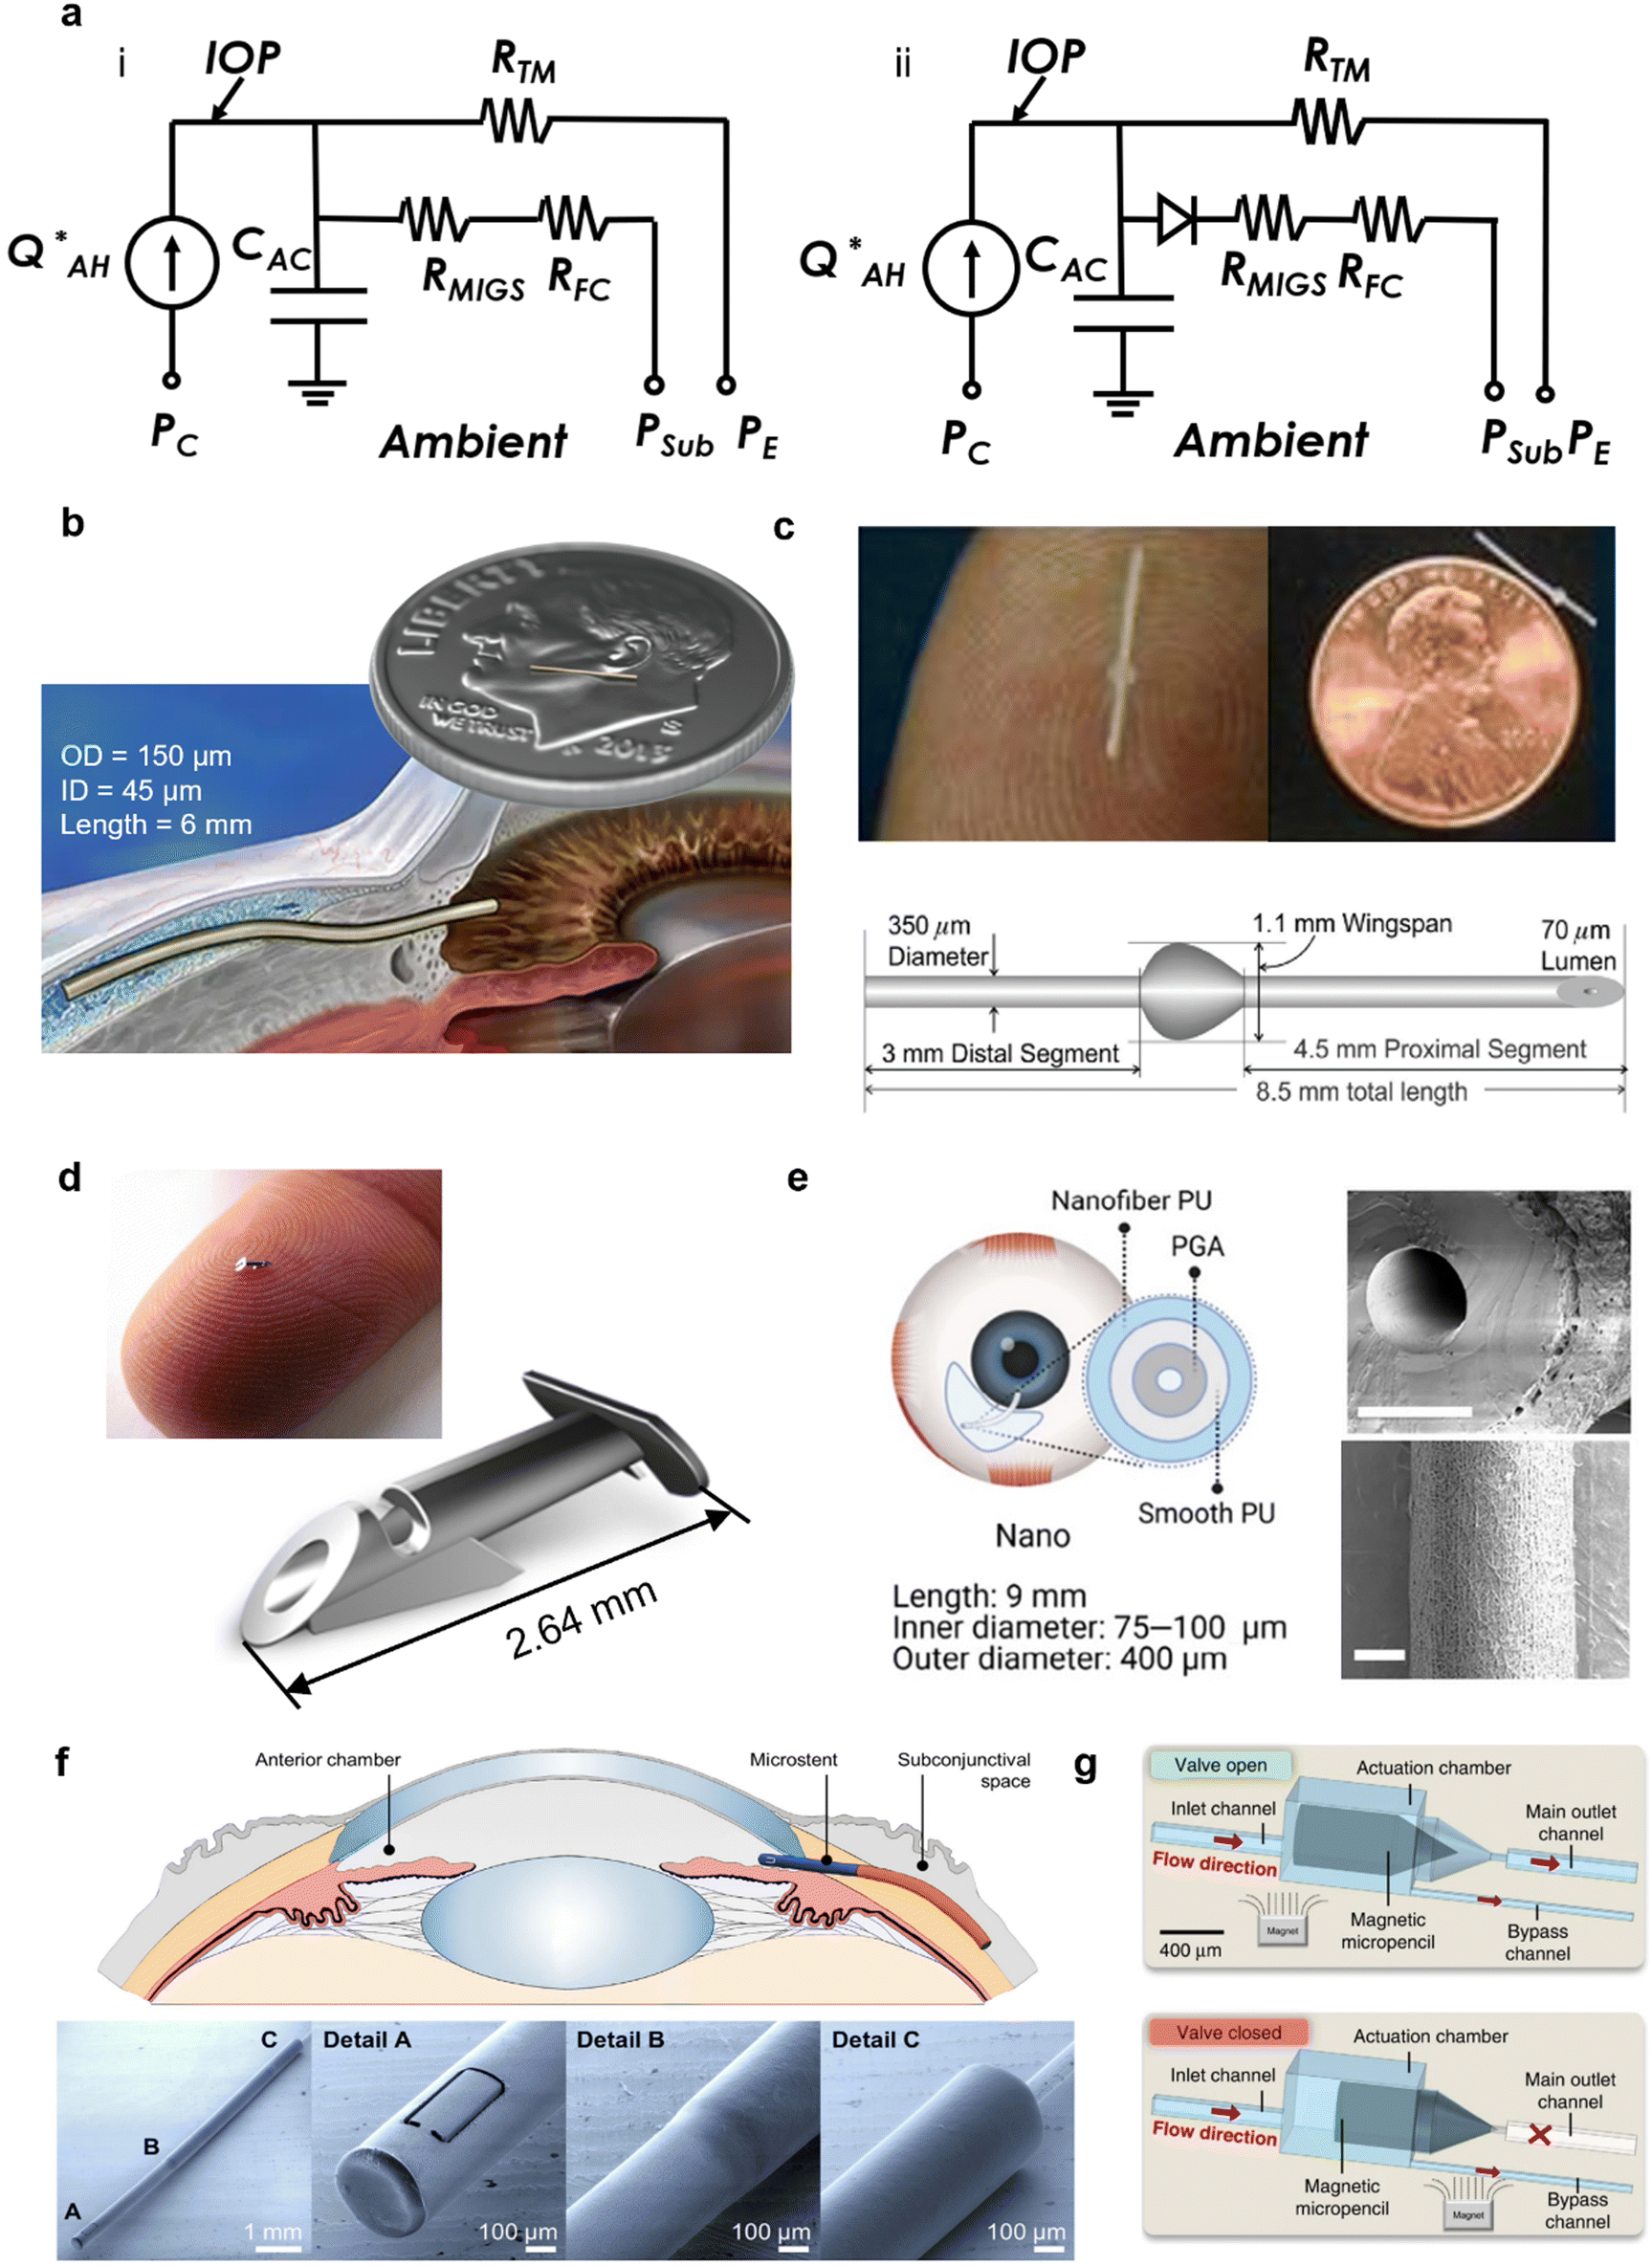 Microfluidics in the eye: a review of glaucoma implants from an engineering  perspective - Lab on a Chip (RSC Publishing) DOI:10.1039/D3LC00407D